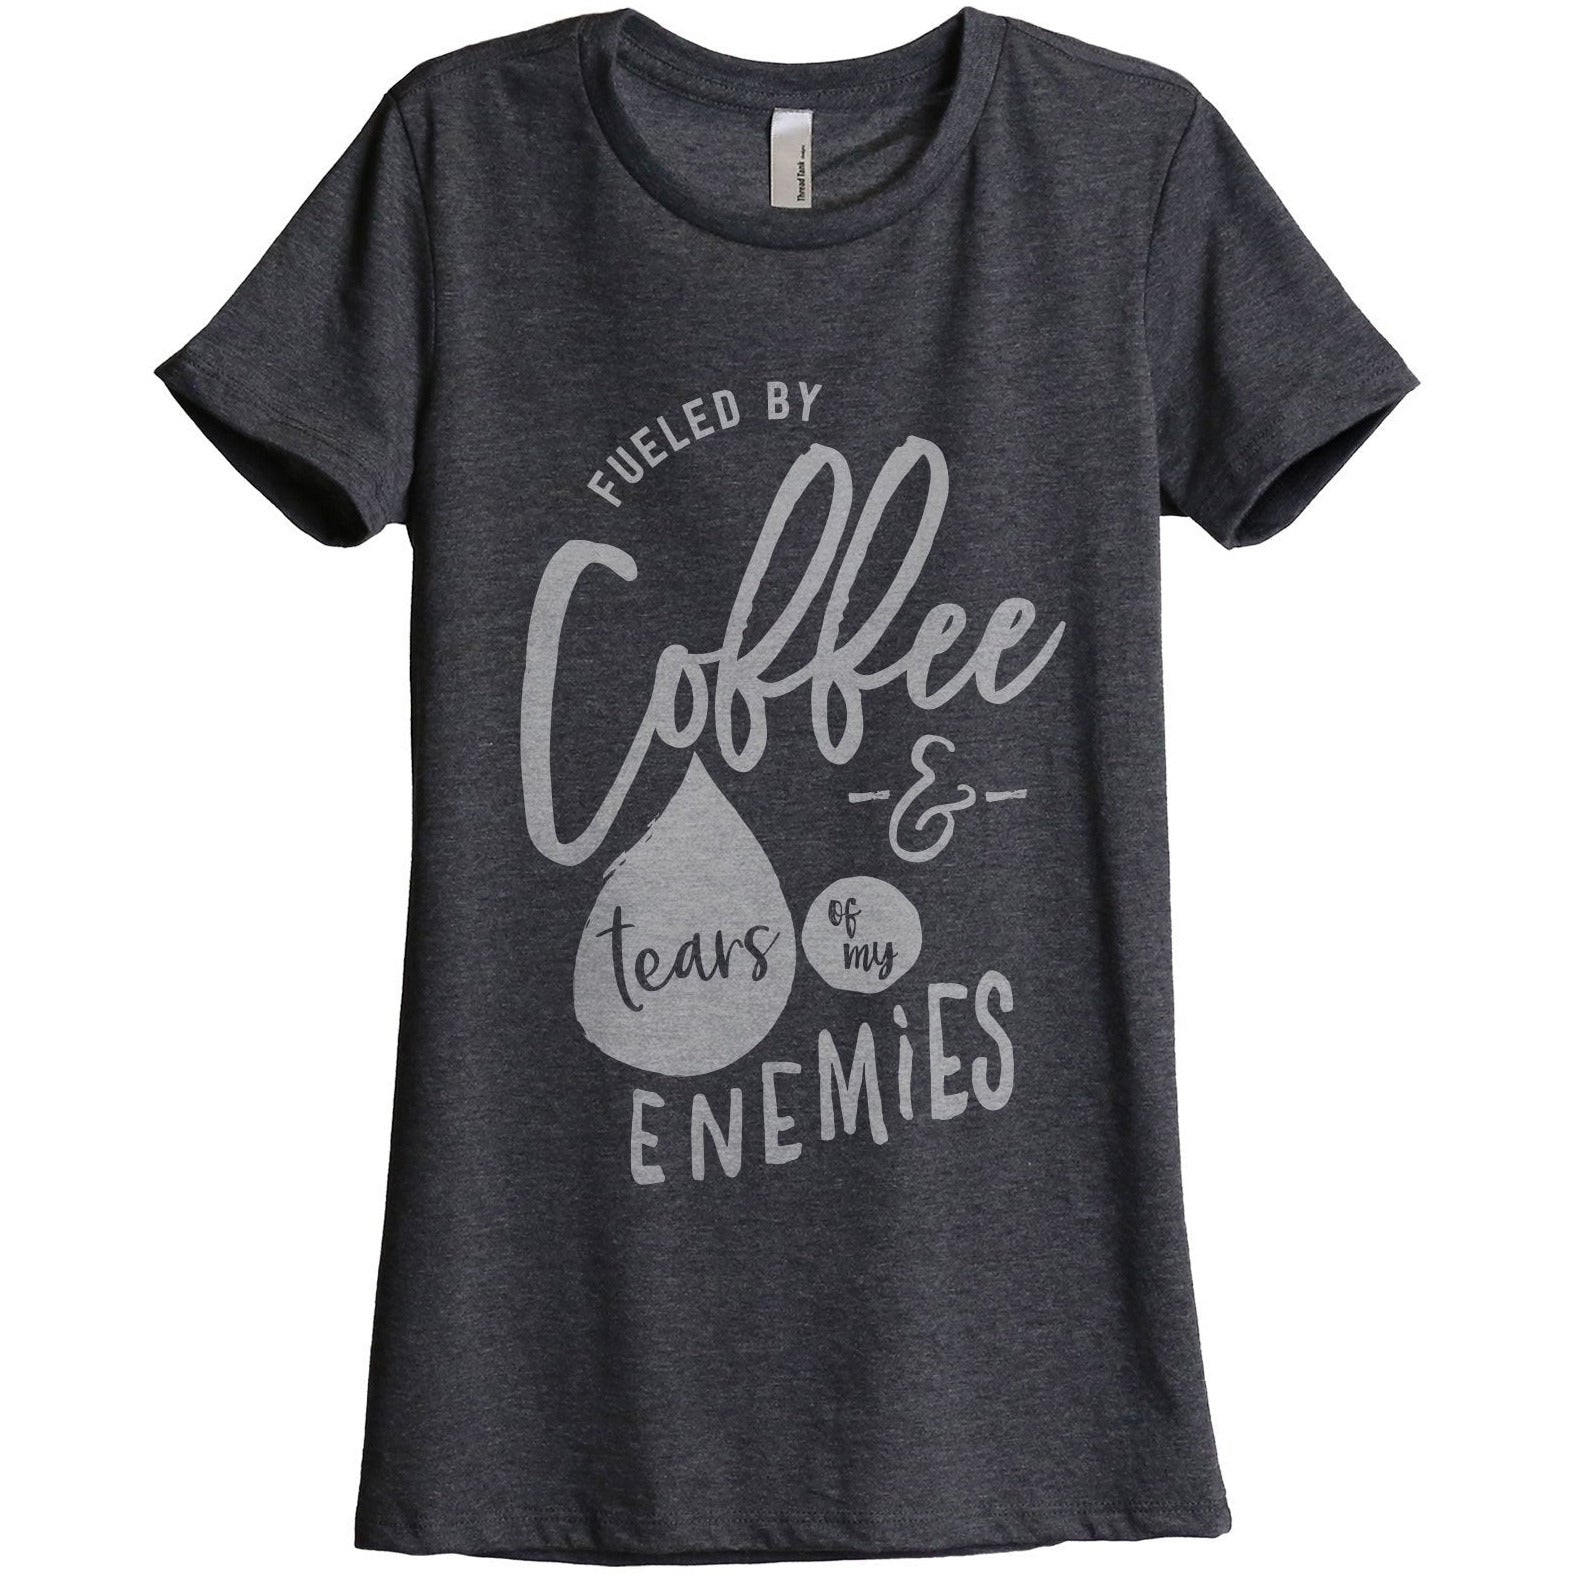 Fueled By Coffee And Tears Of My Enemies Women's Relaxed Crewneck T-Shirt Top Tee Charcoal Grey
